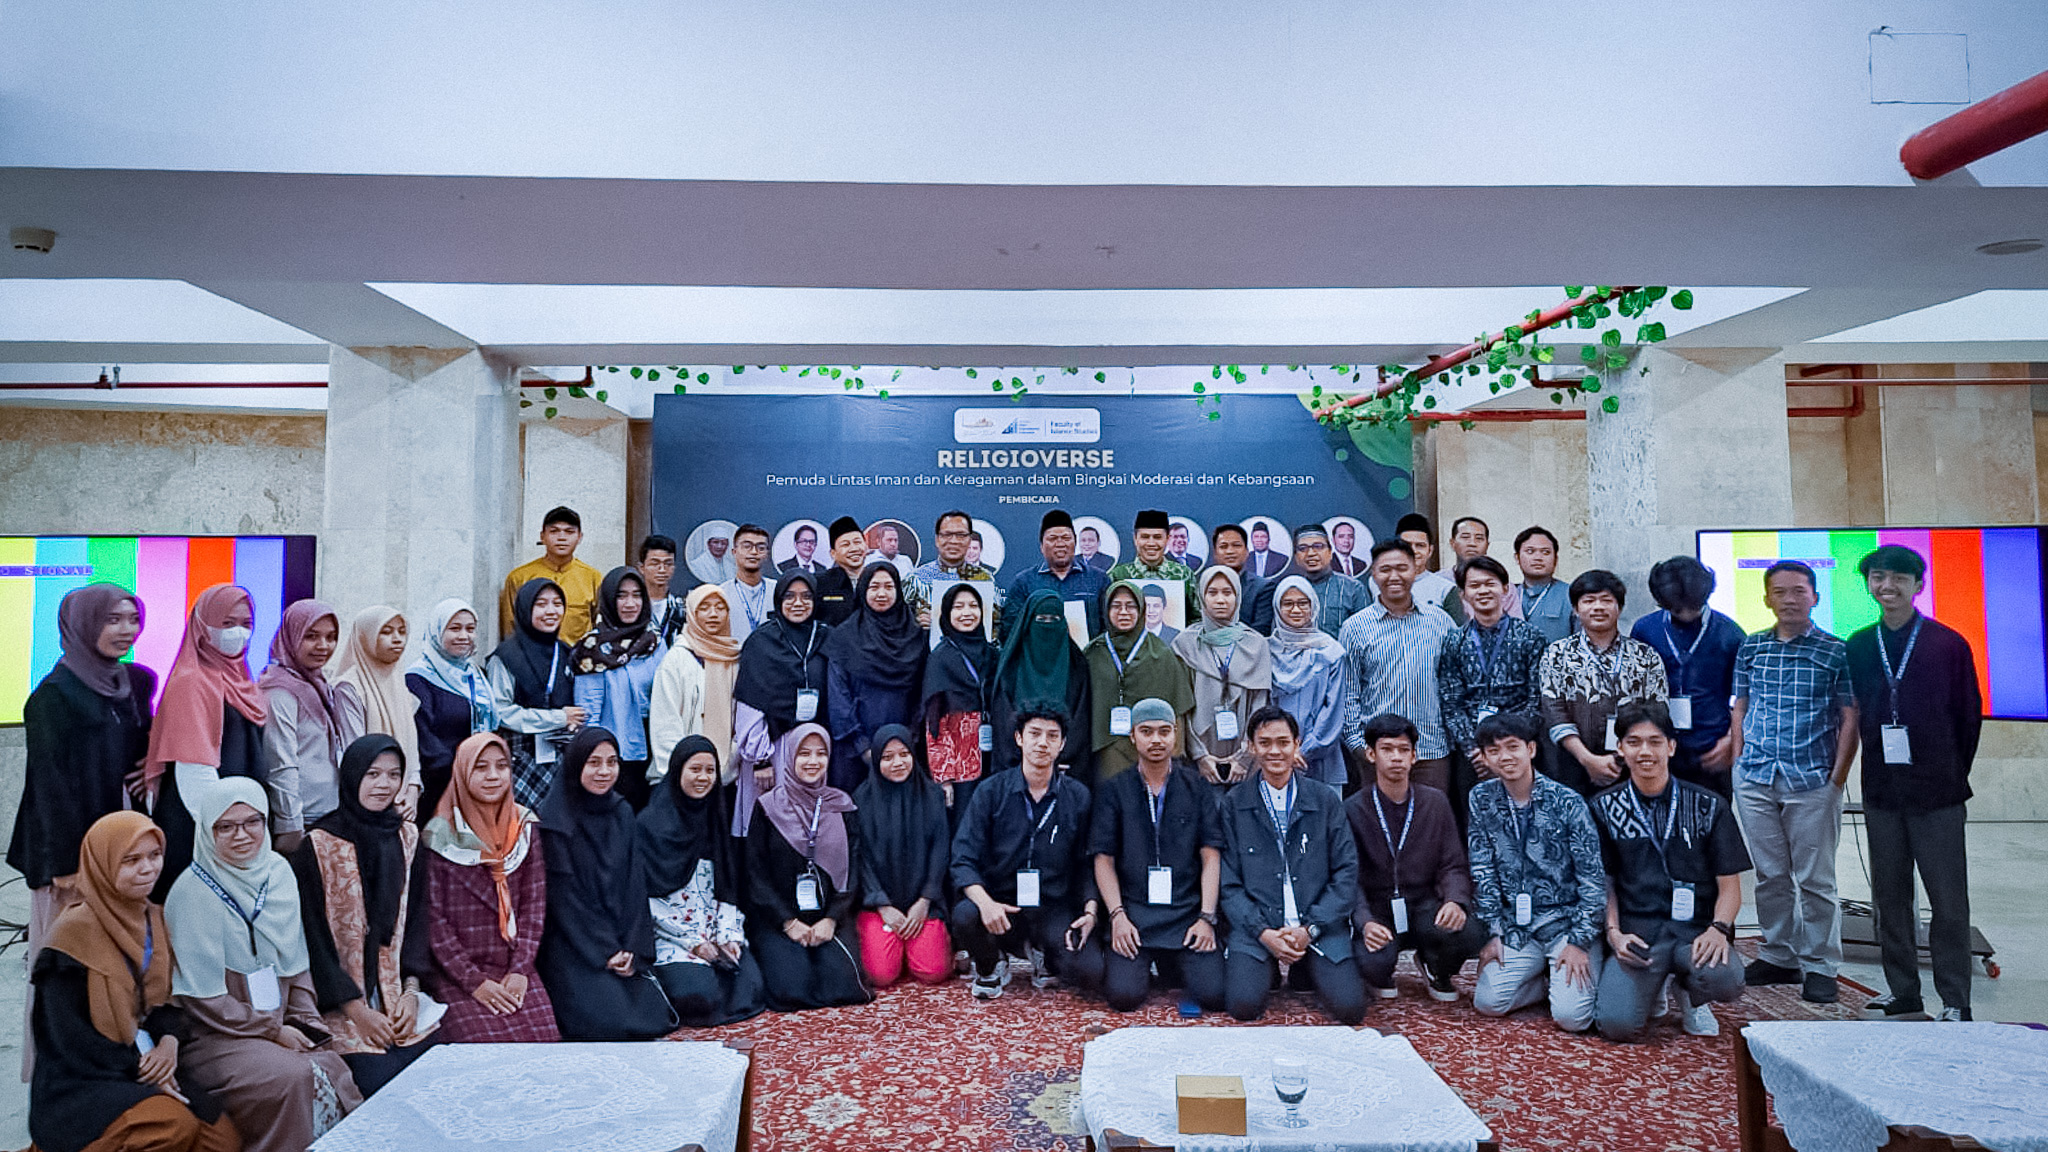 BPMI and UIII’s Faculty of Islamic Studies Train Youths on Religious Moderation